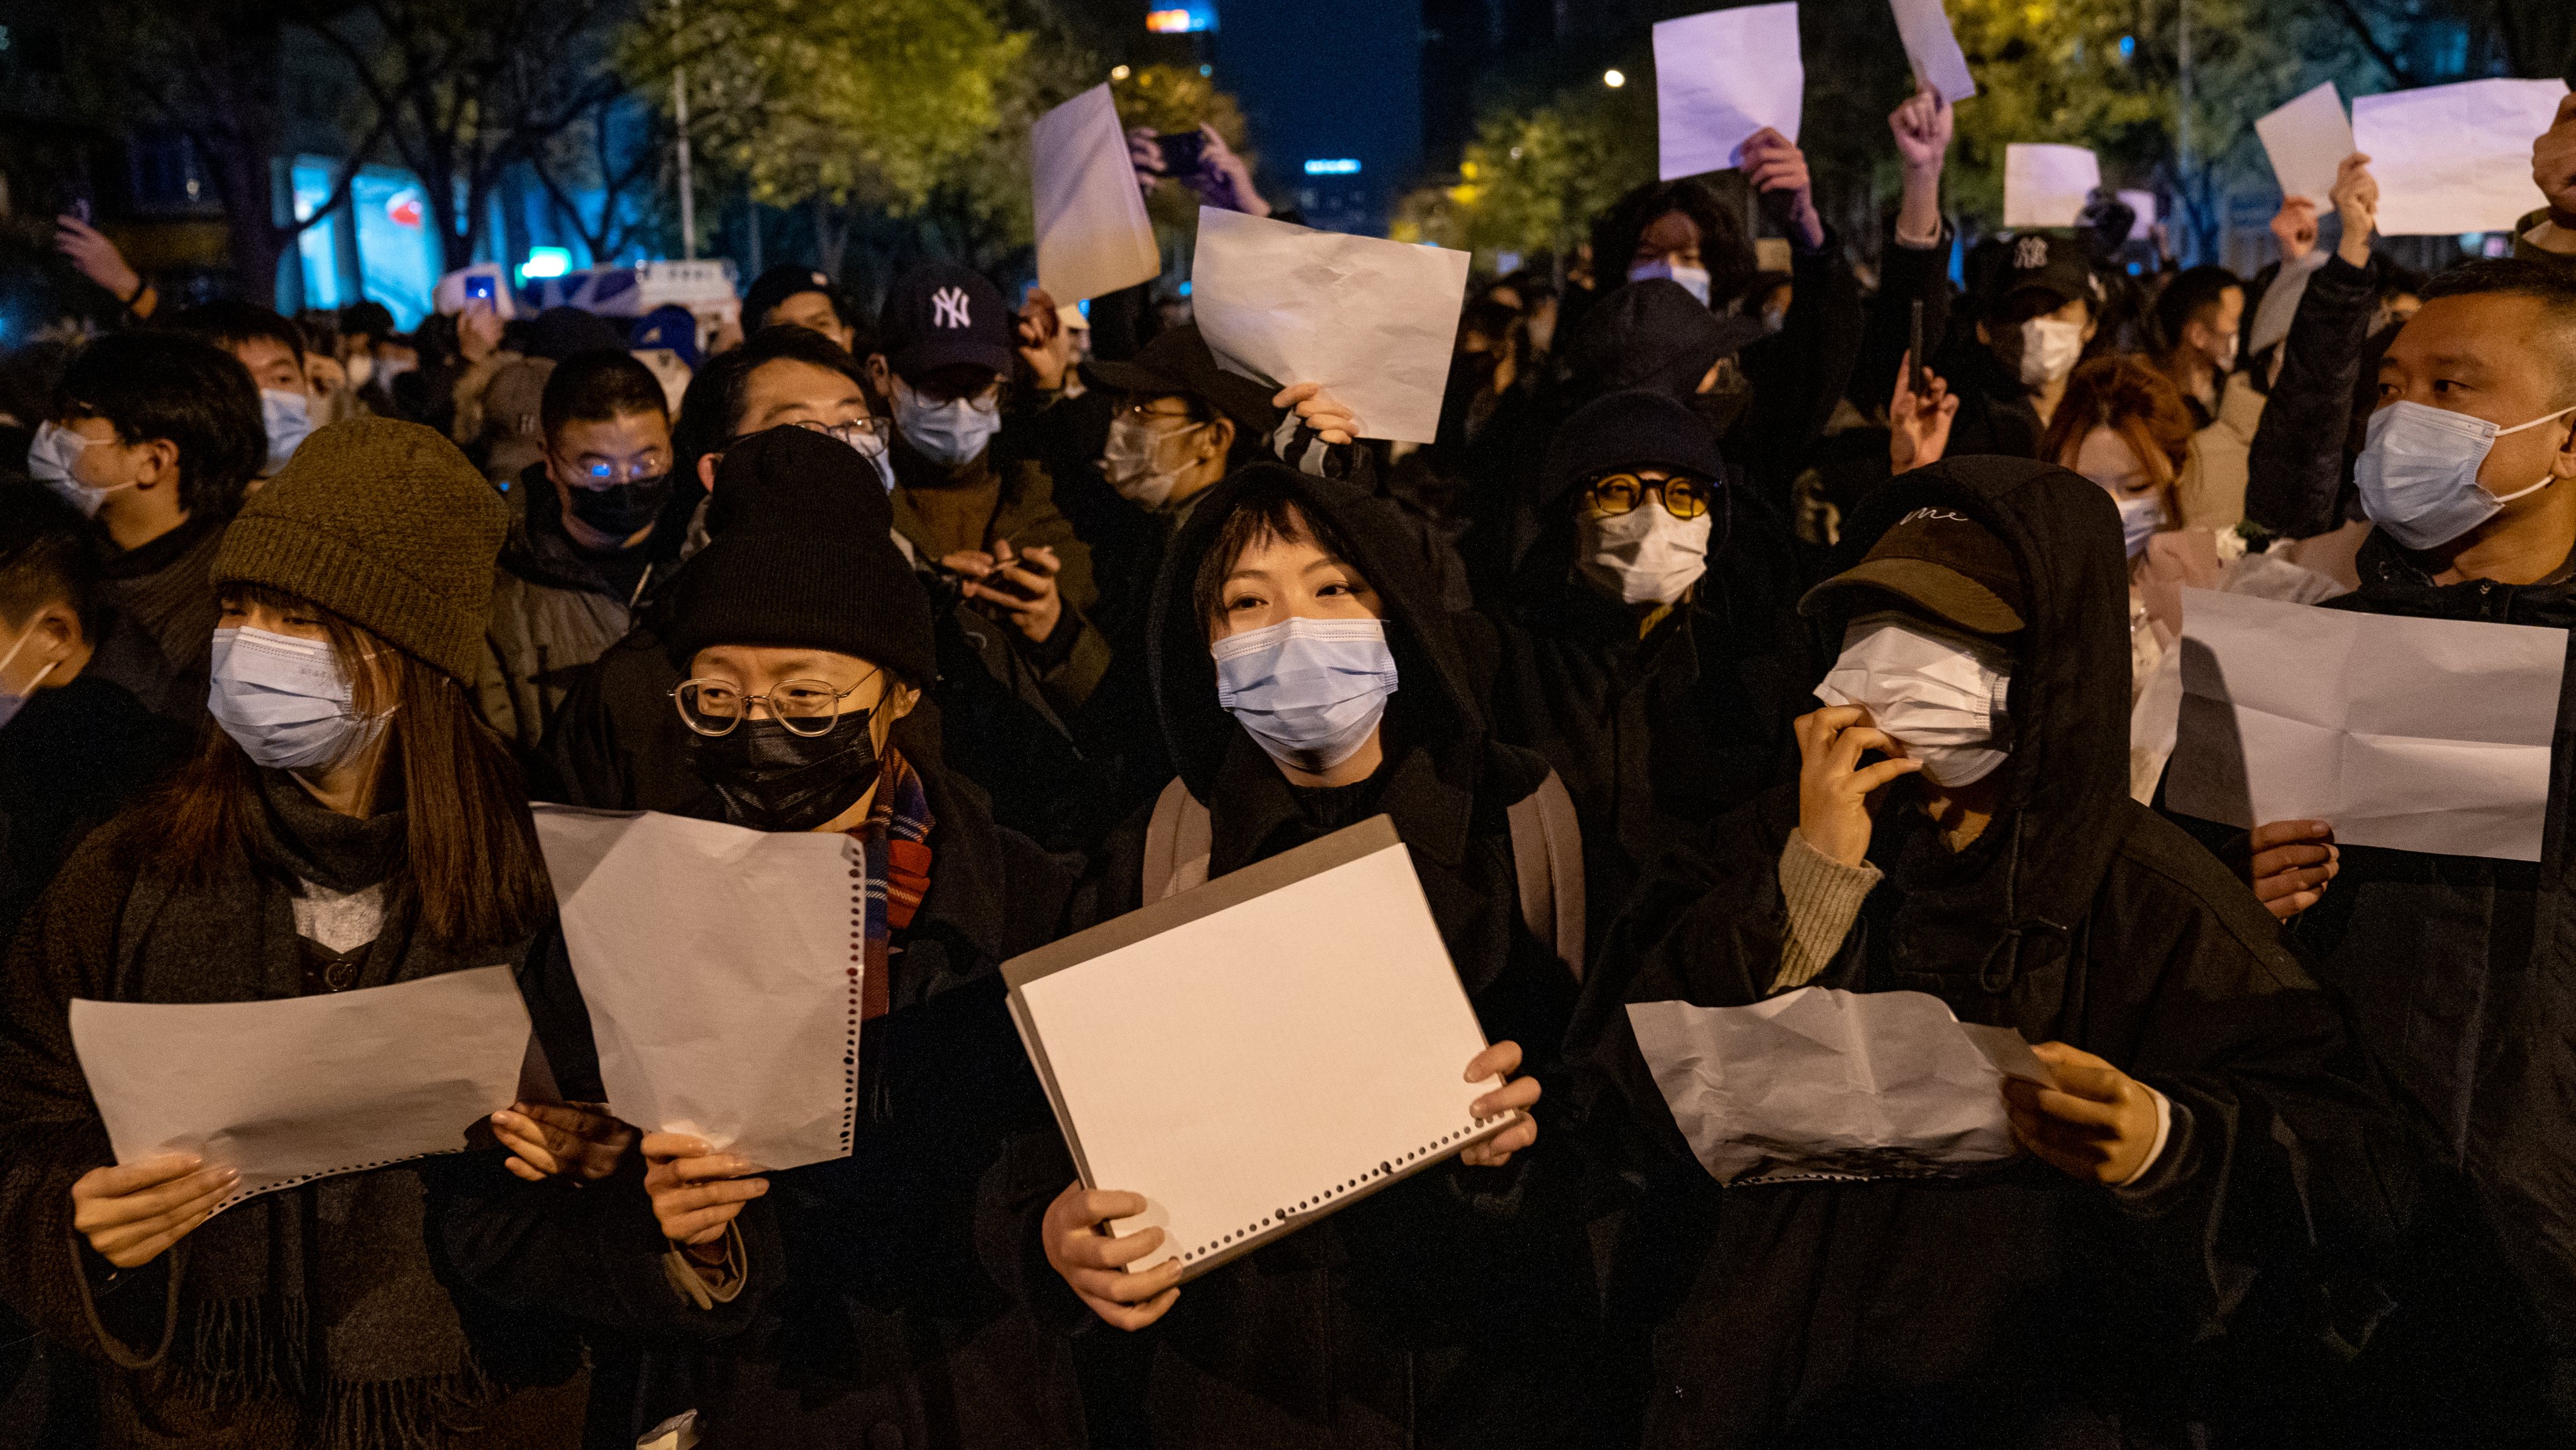 Protest in Beijing against Covid restrictions triggered by a fire in Urumqi